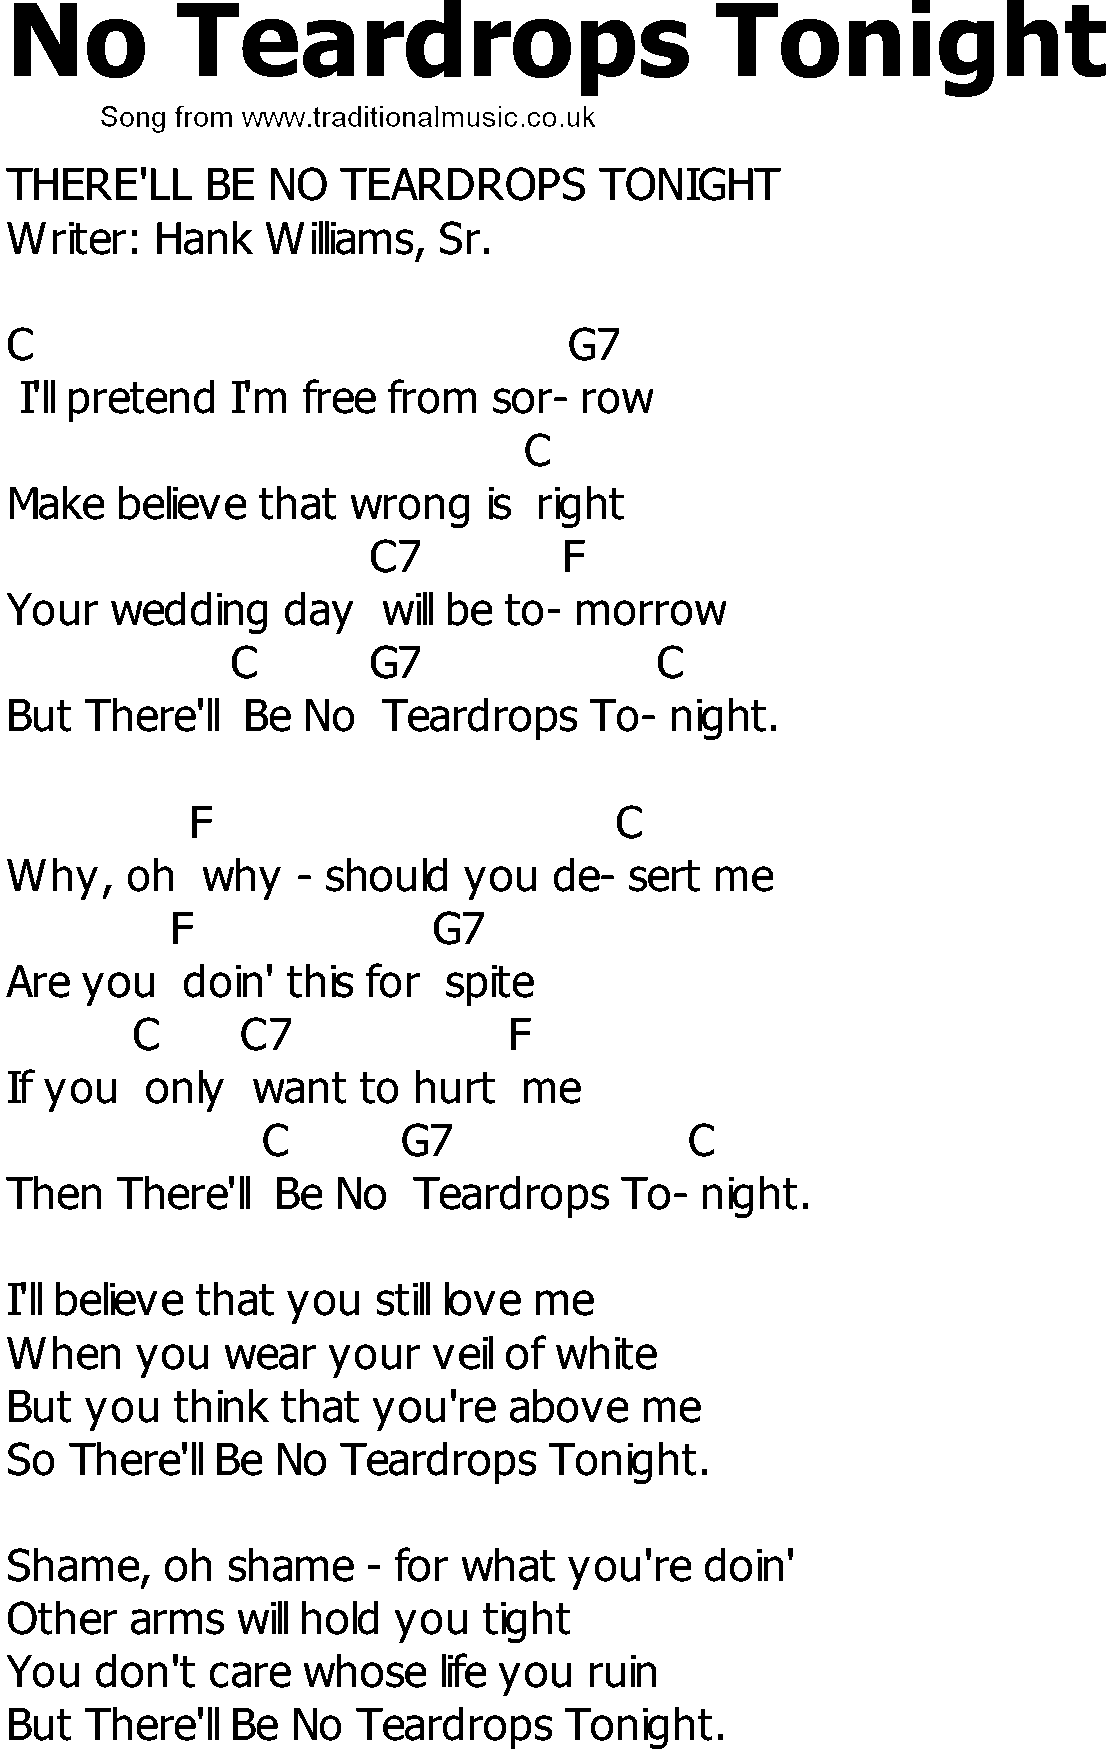 Old Country song lyrics with chords - No Teardrops Tonight